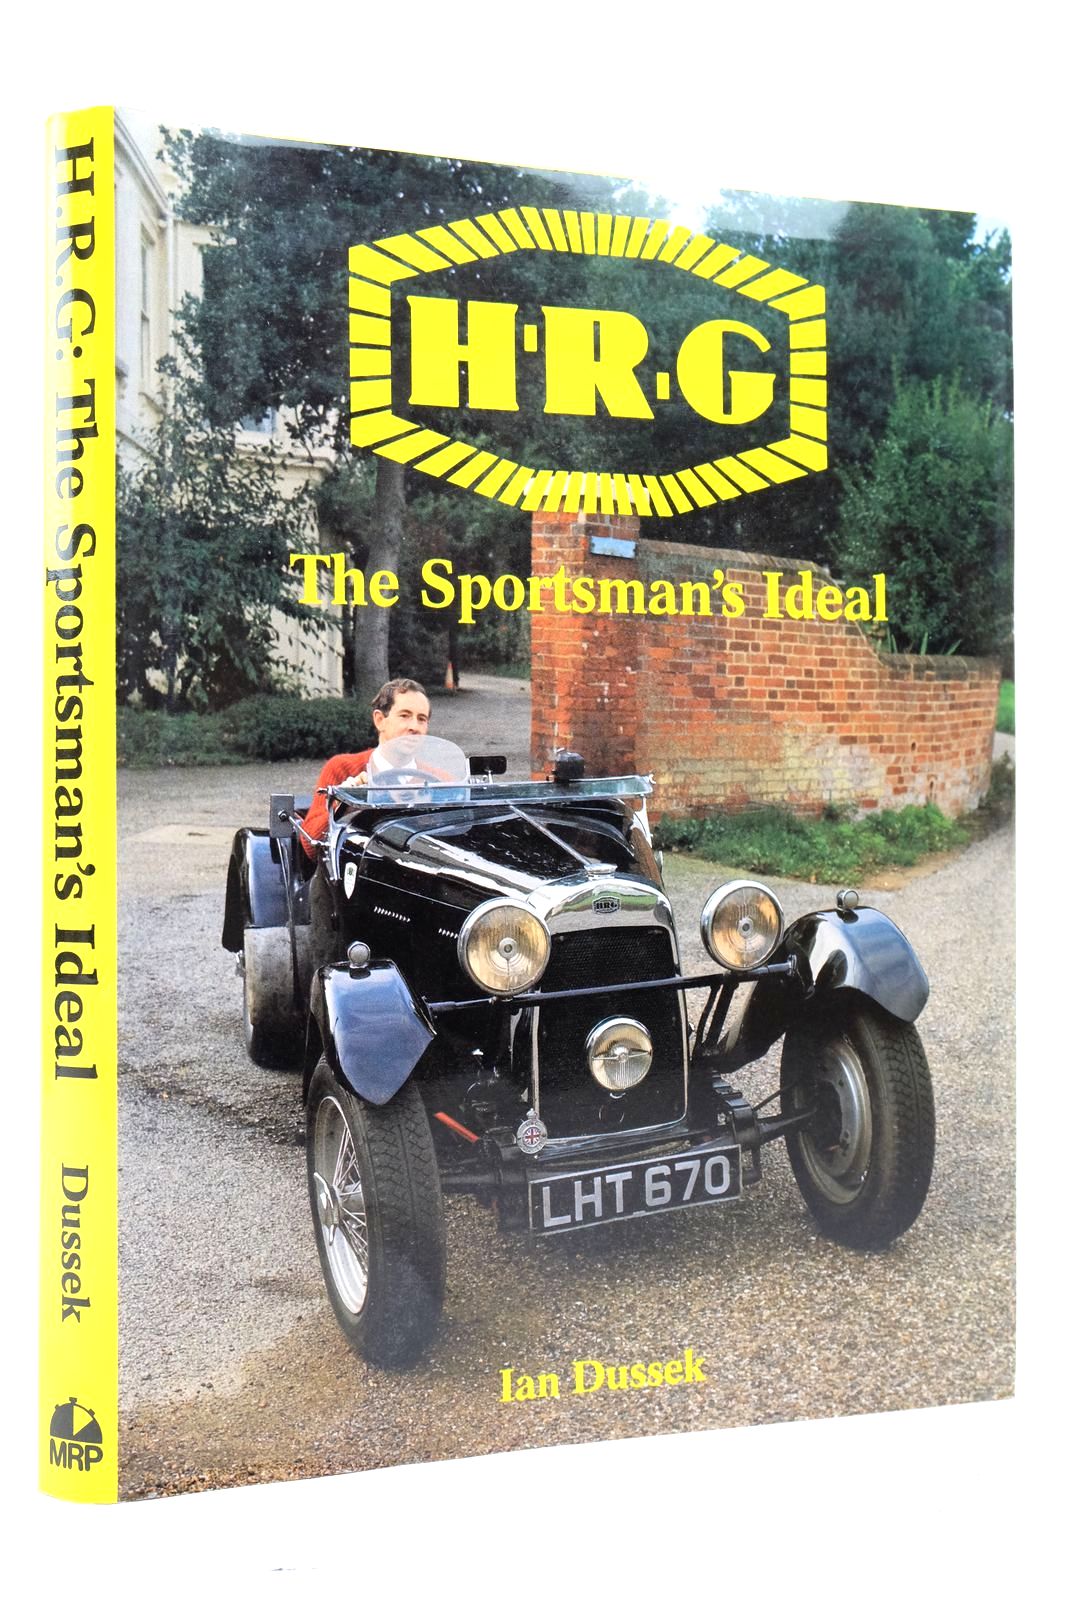 Photo of H.R.G. THE SPORTSMAN'S IDEAL written by Dussek, Ian published by Motor Racing Publications Ltd. (STOCK CODE: 2139878)  for sale by Stella & Rose's Books